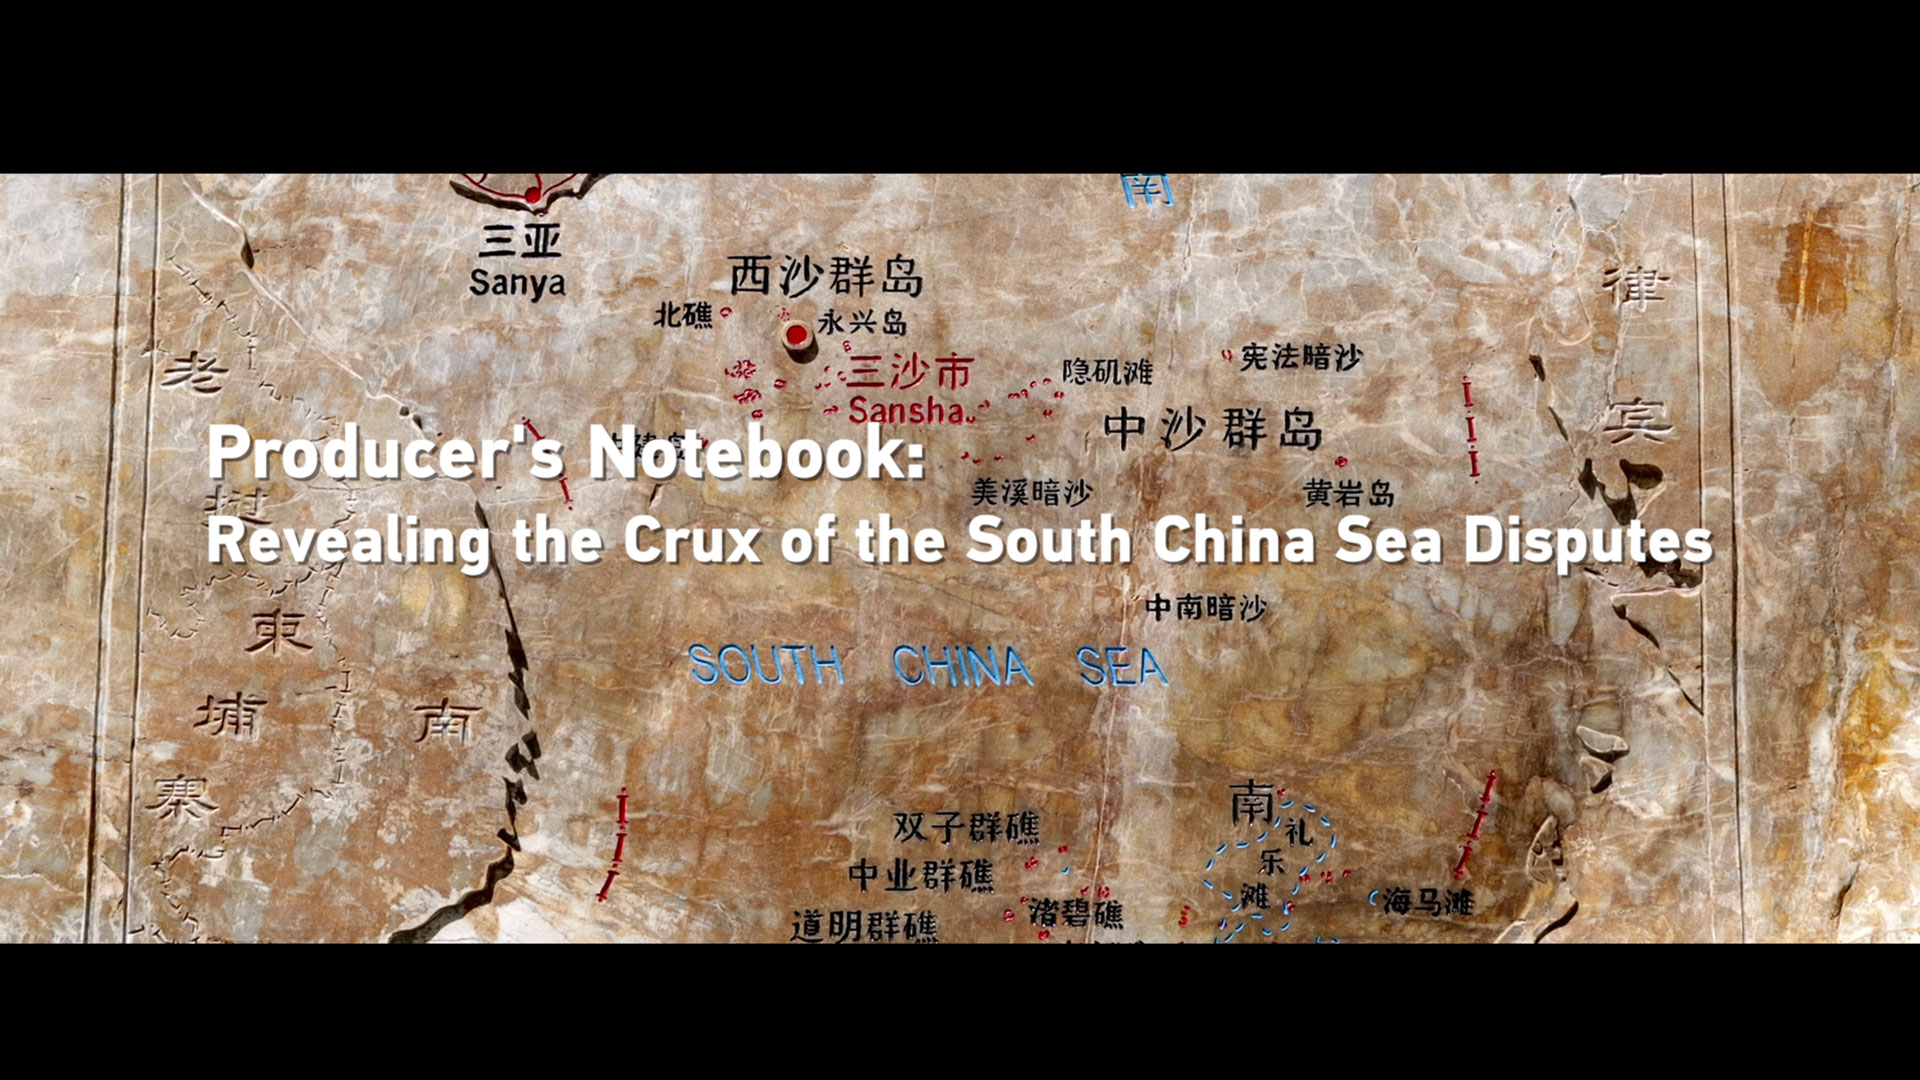 Producer's notebook: Revealing the crux of the South China Sea disputes